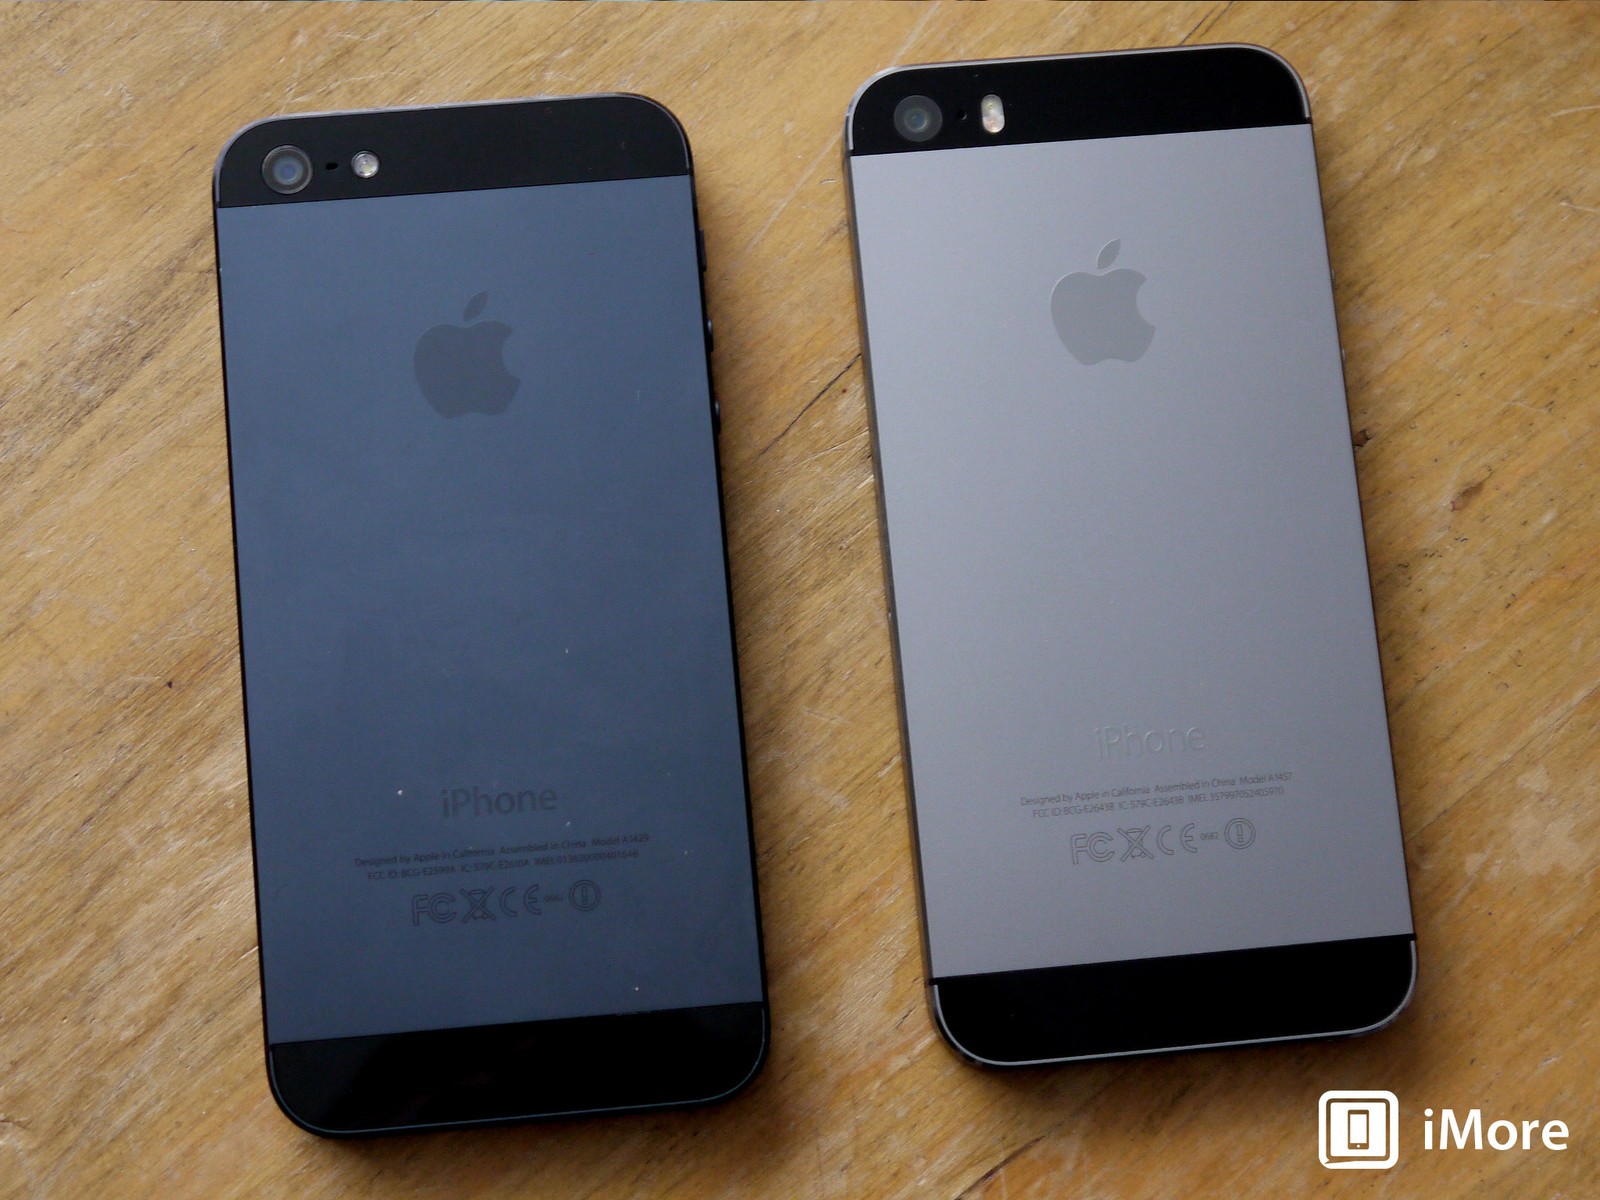 The difference between the Space Gray iPhone 5s and the black iPhone ...